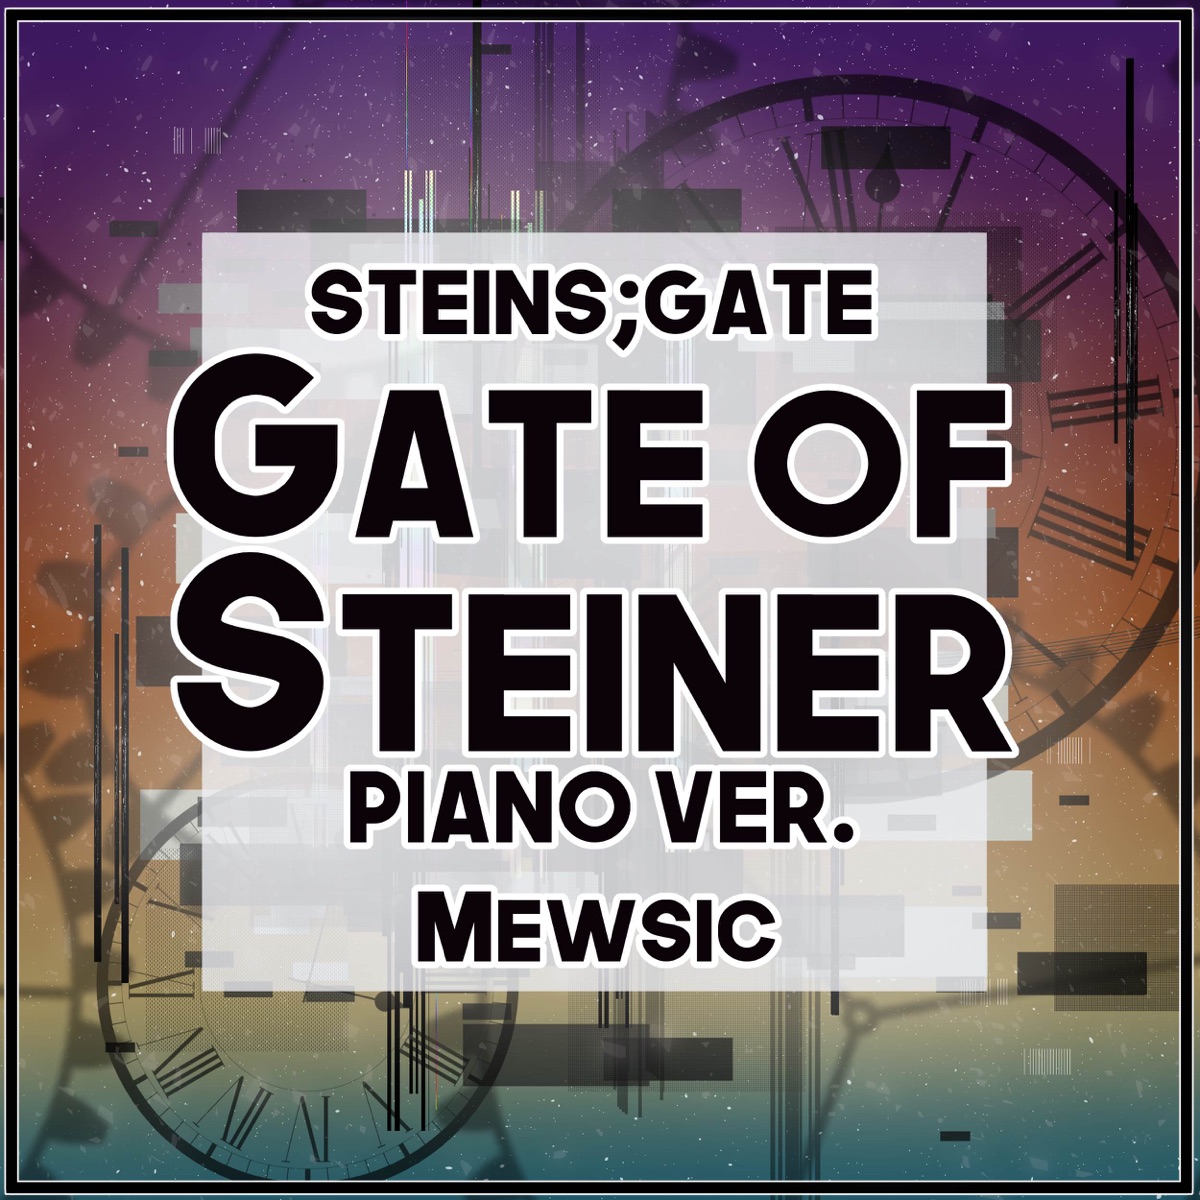 ᐉ Gate Of Steiner Piano Ver From Steins Gate Mp3 3kbps Flac Download Soundtracks